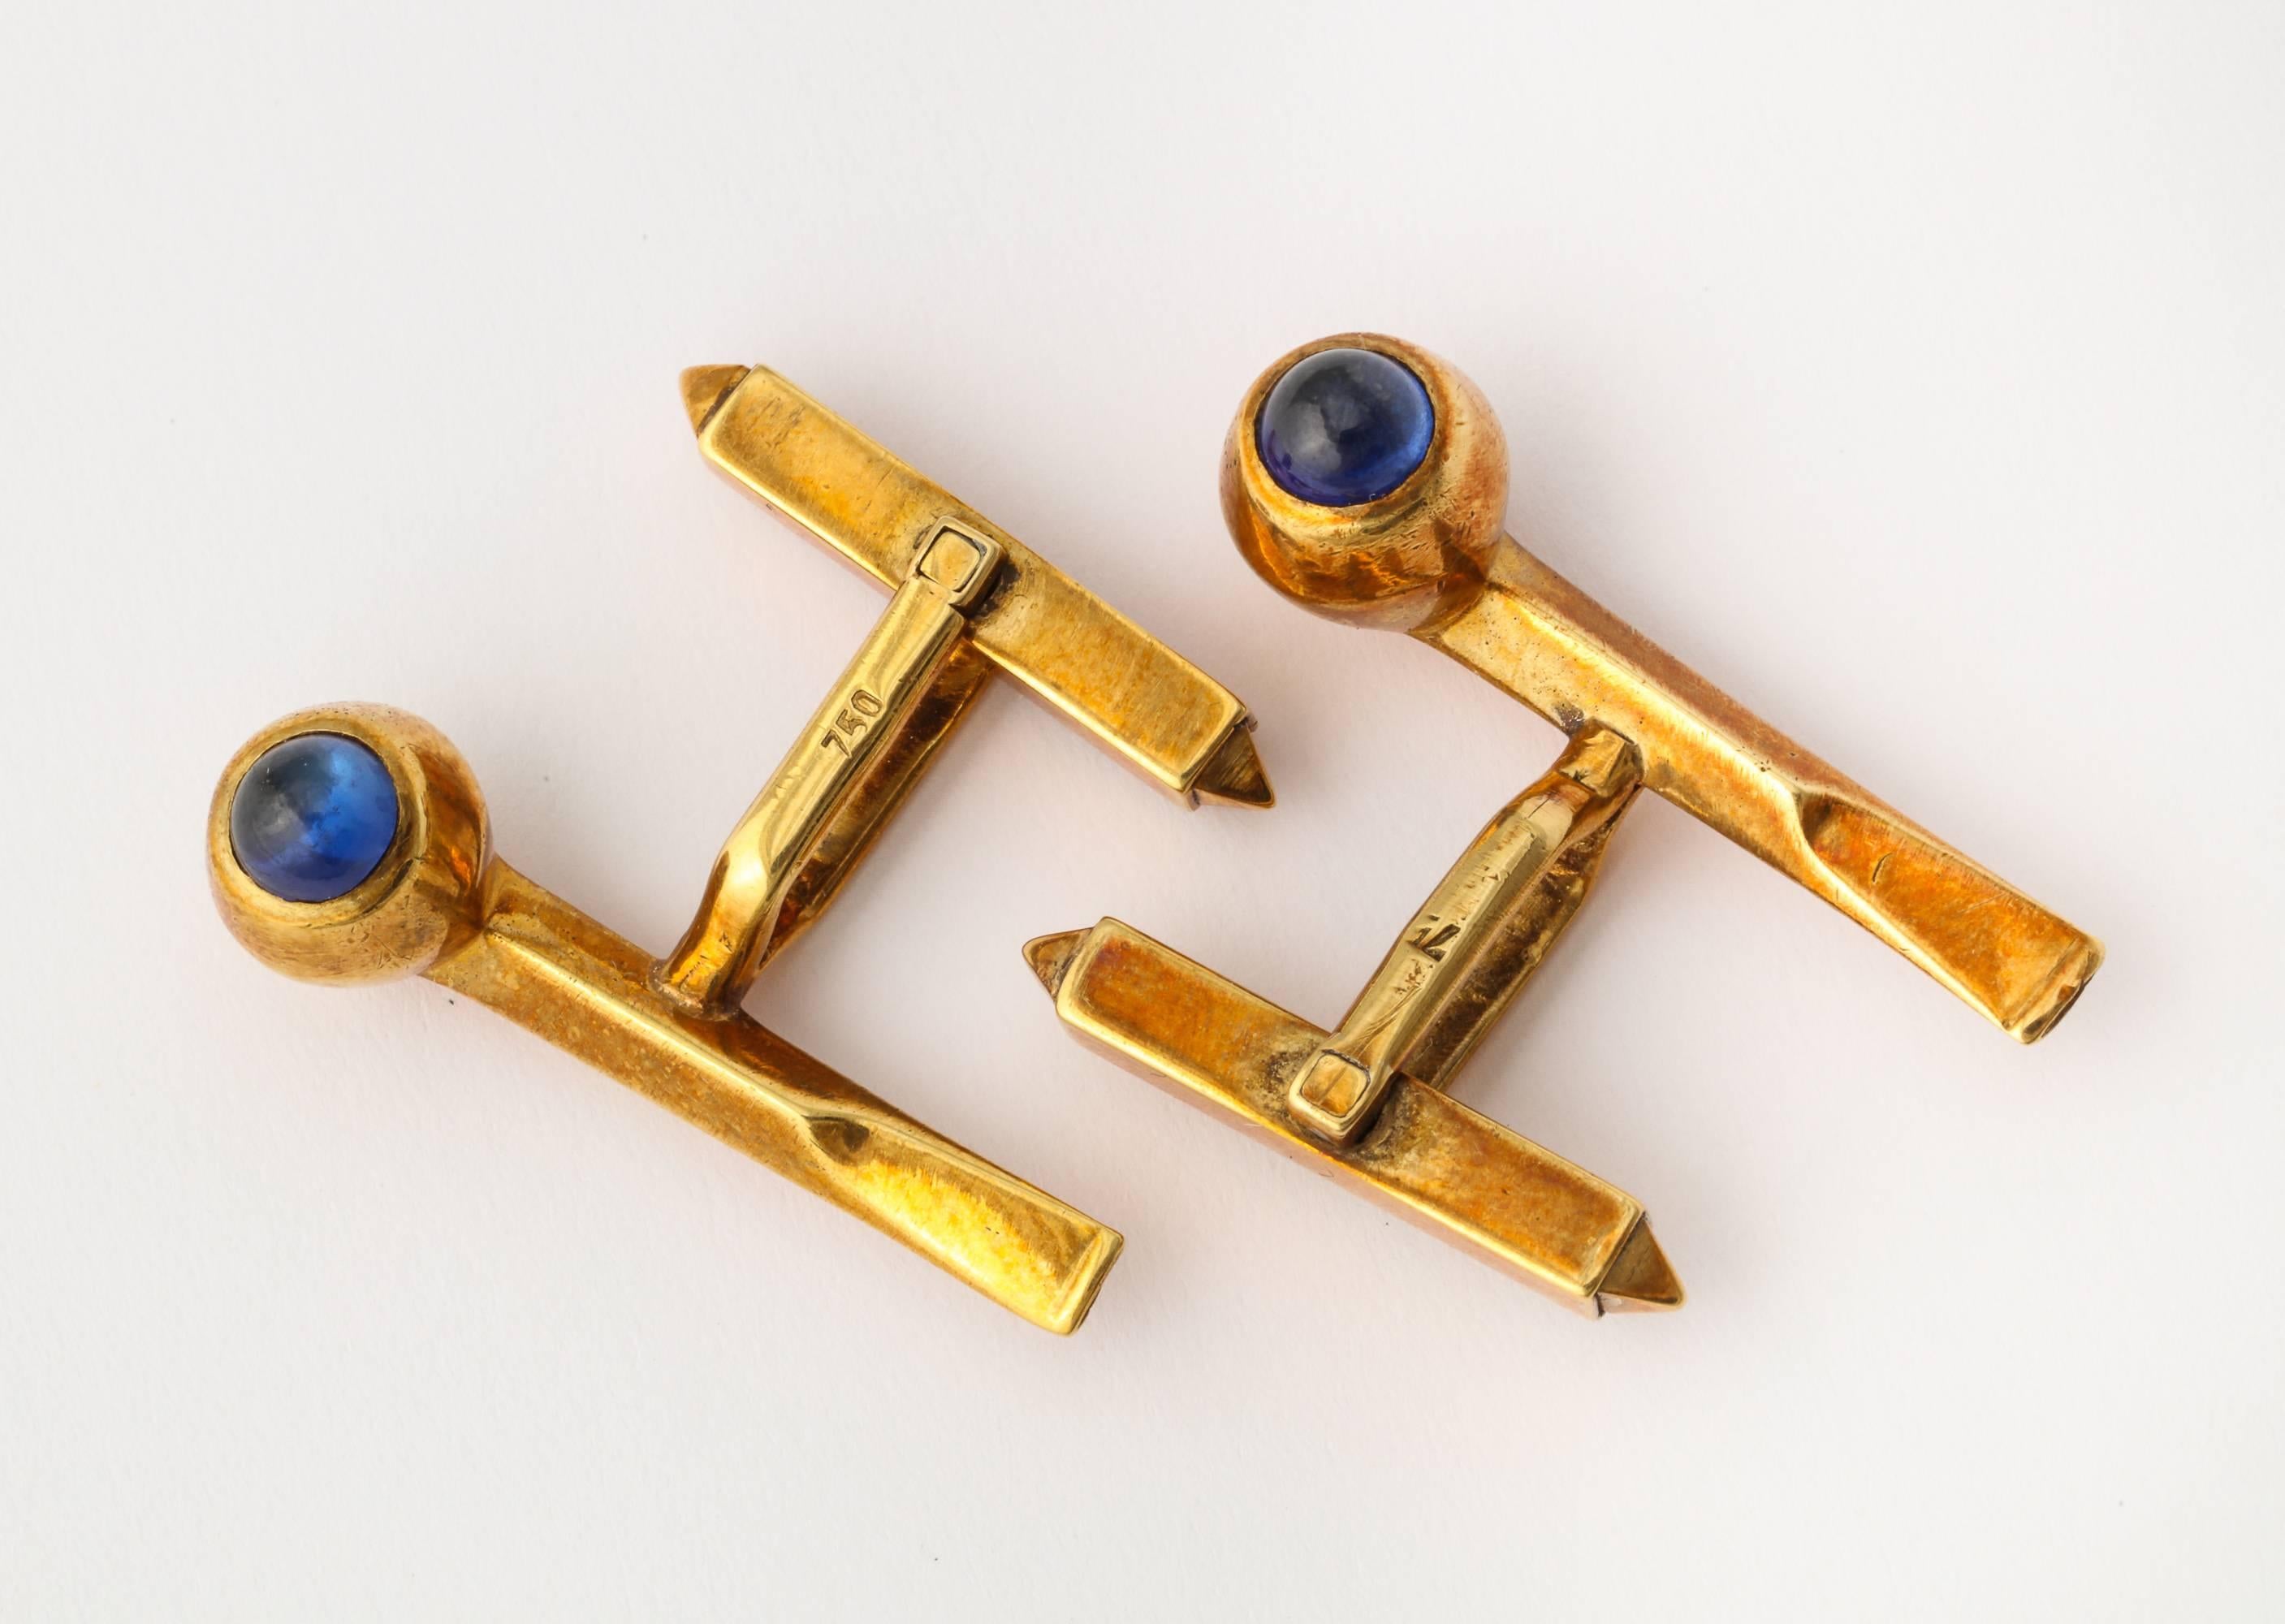 A whimsical pair of cuff links in 18K rose gold as well crafted figural pipes with cabochon sapphires in the bowls. 750 Gold mark. 1 1/8 inches long.